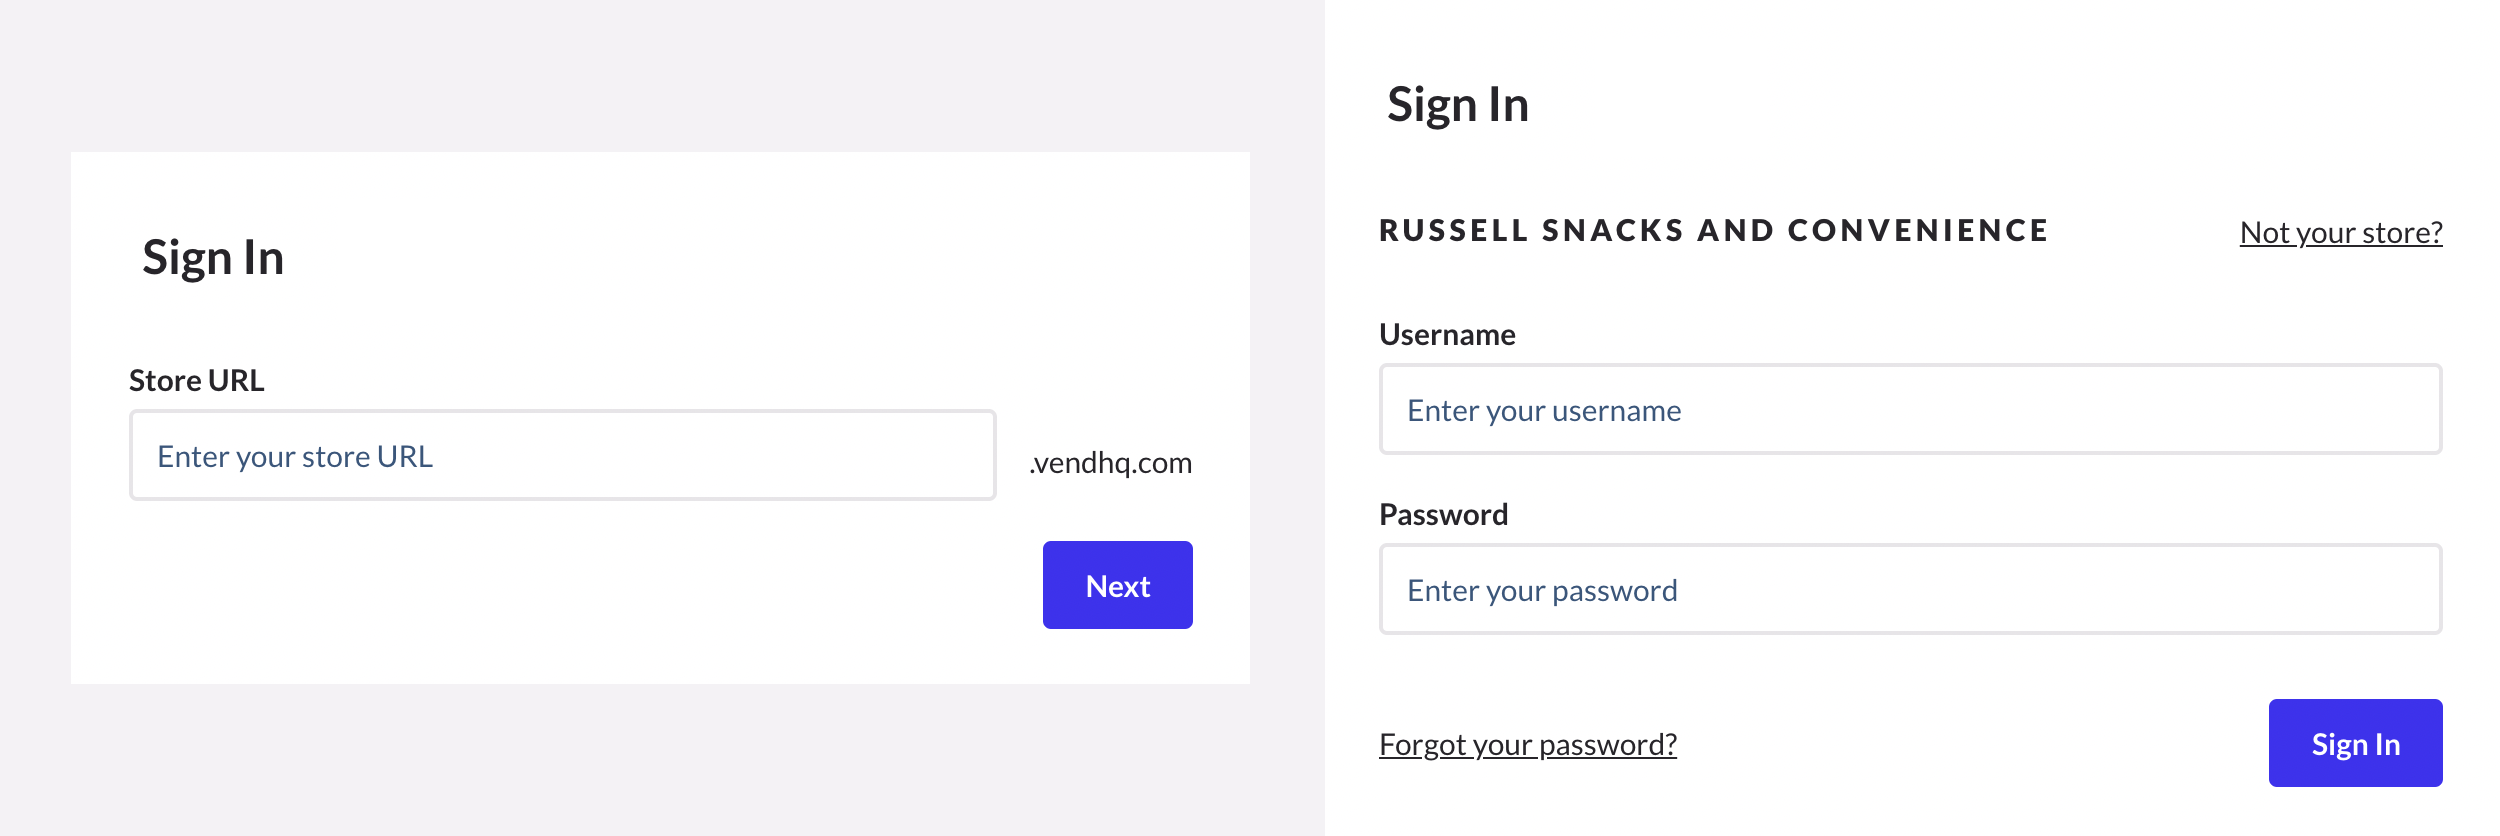 Sign-In-Store-URL-and-Username-Password.png